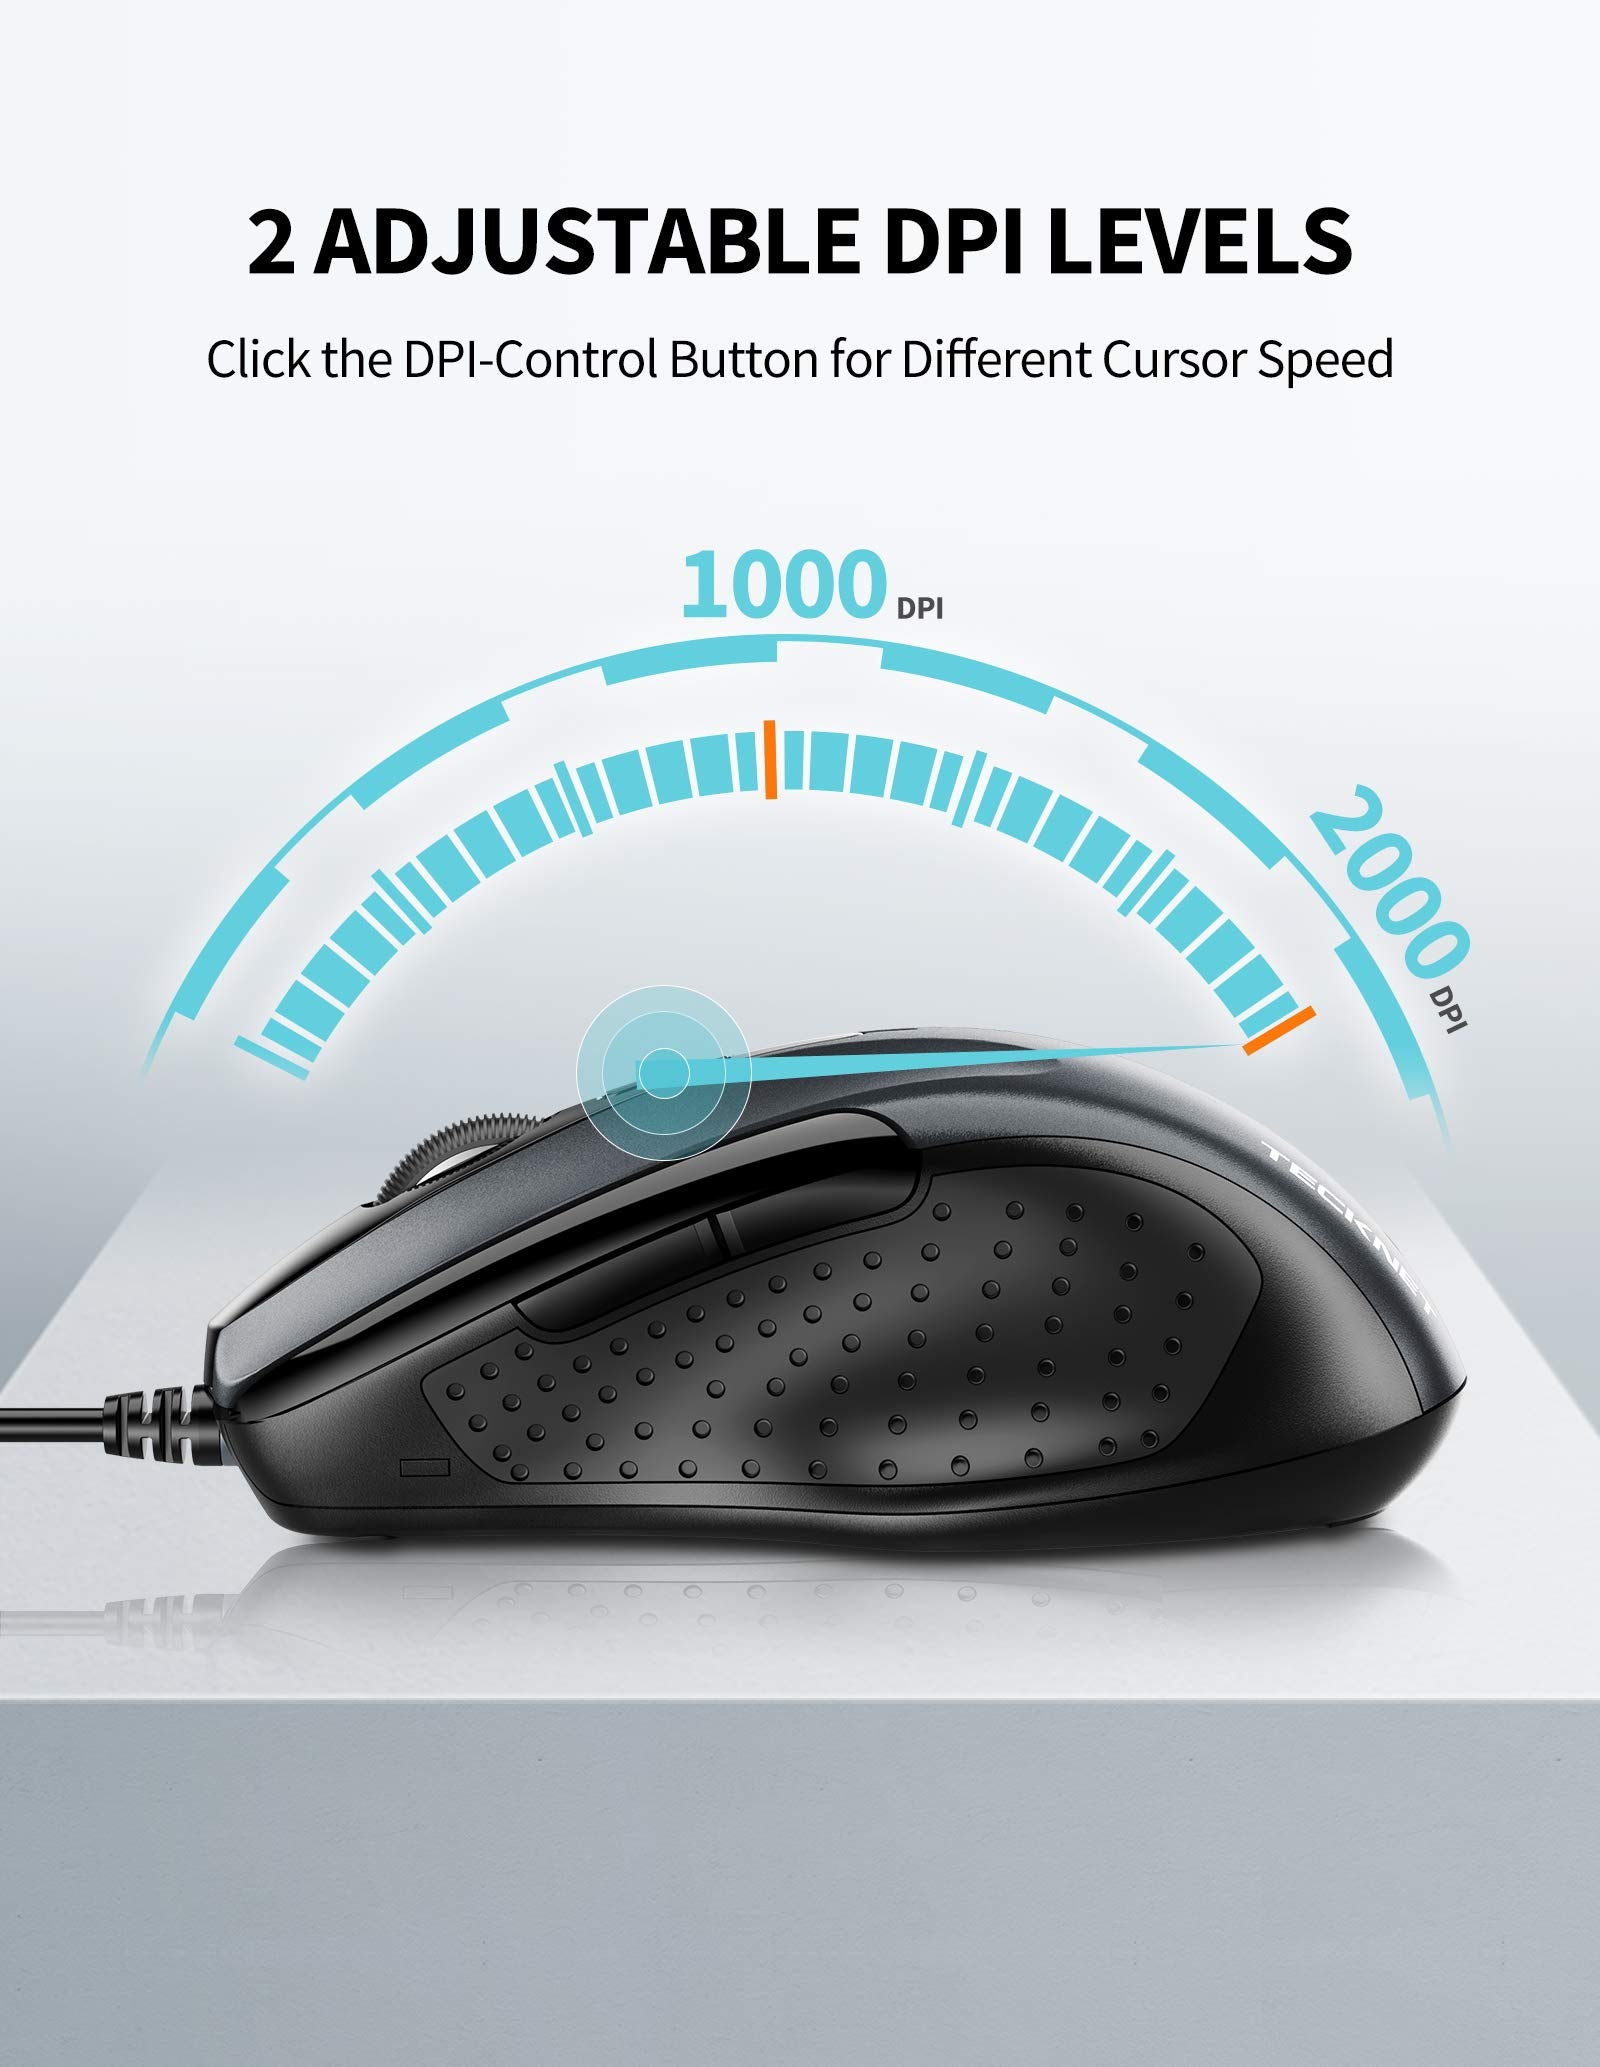 TECKNET Pro S2 High Performance Wired USB Mouse, Computer Mouse for Laptop, PC Mouse, Plug In, 6 Buttons, Upto 2000 DPI